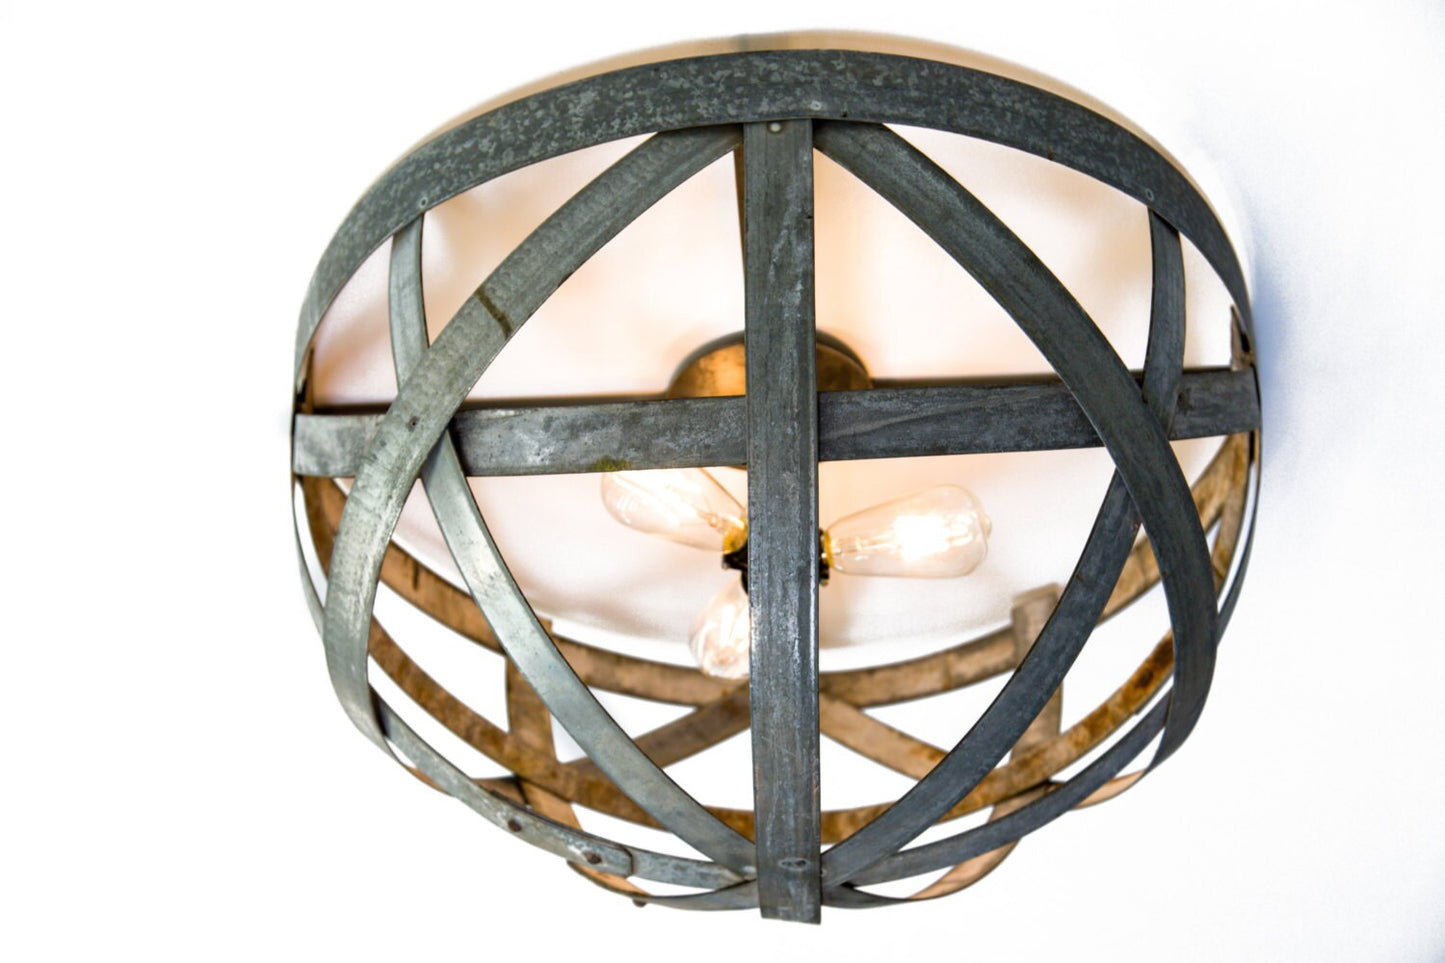 Wine Barrel Ring Flush Mount Ceiling Light - Orbis - Made from retired CA wine barrel rings. 100% Recycled!